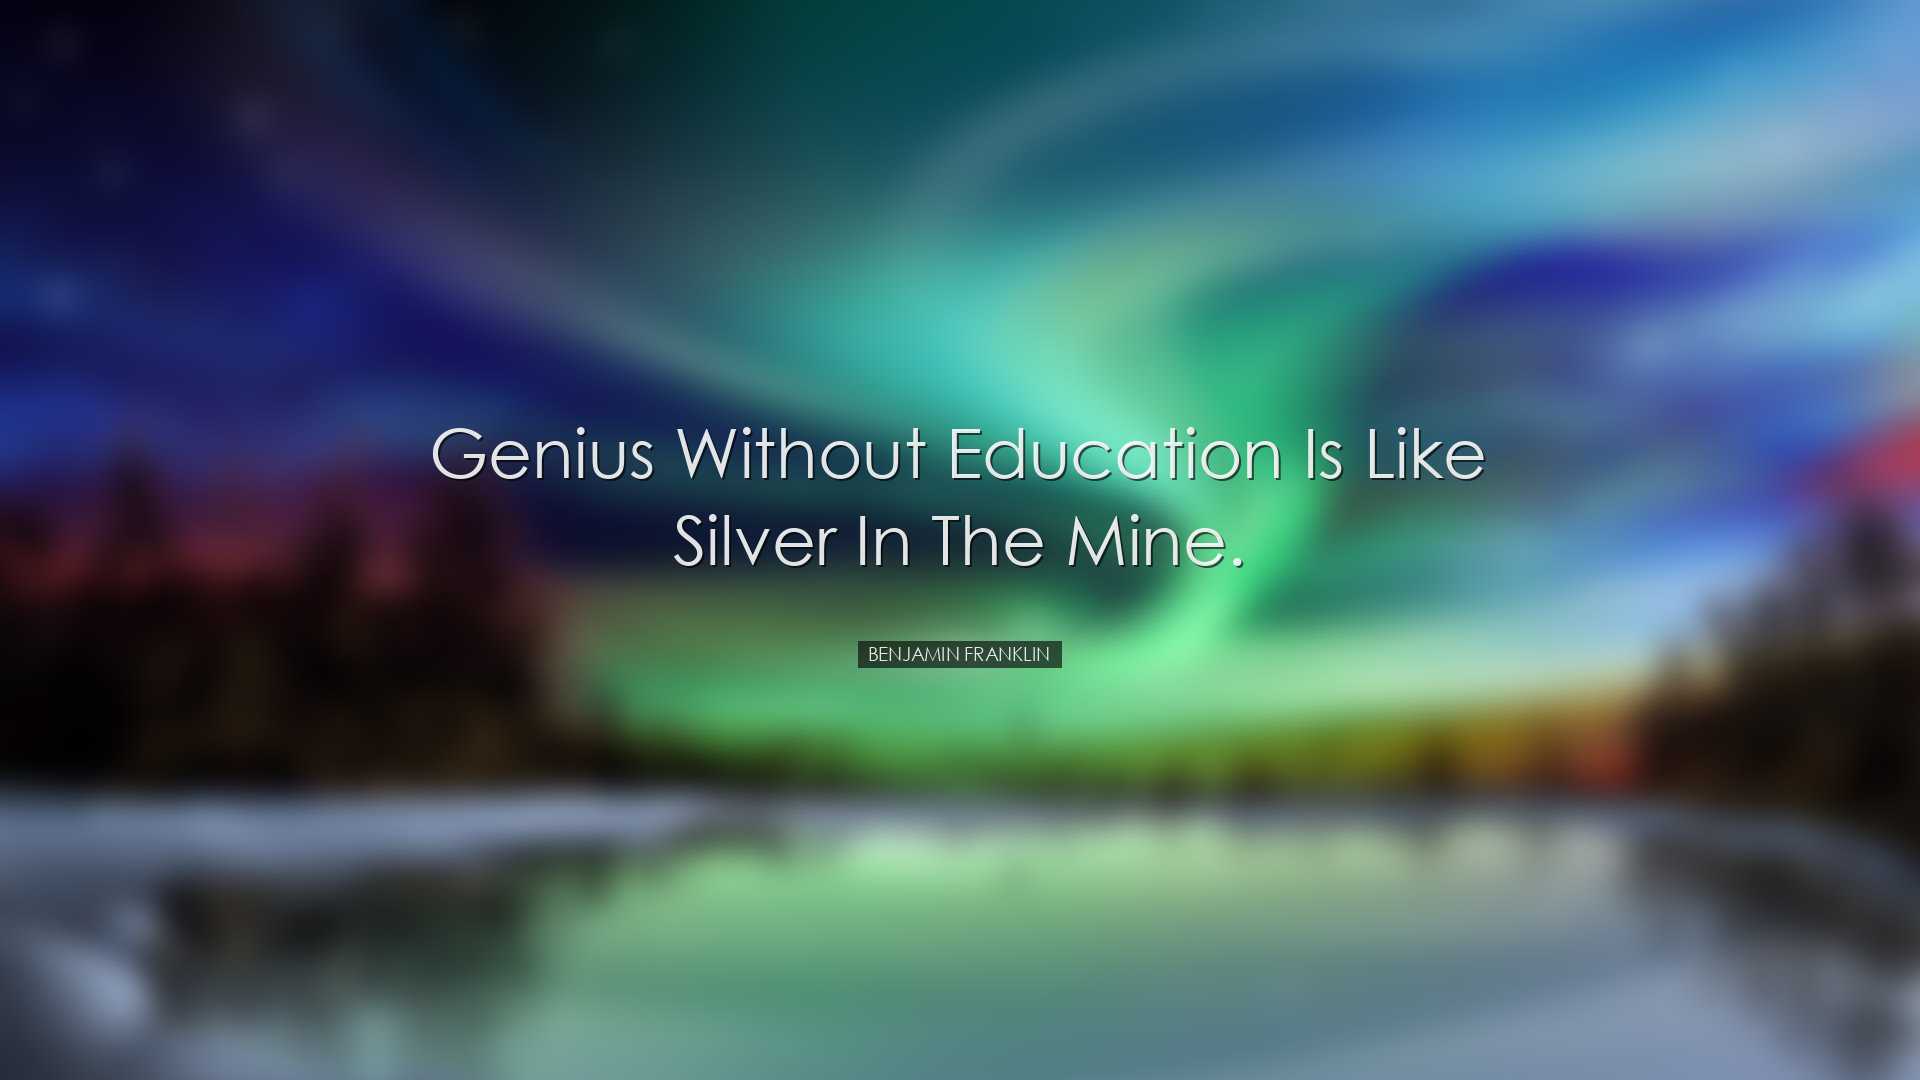 Genius without education is like silver in the mine. - Benjamin Fr